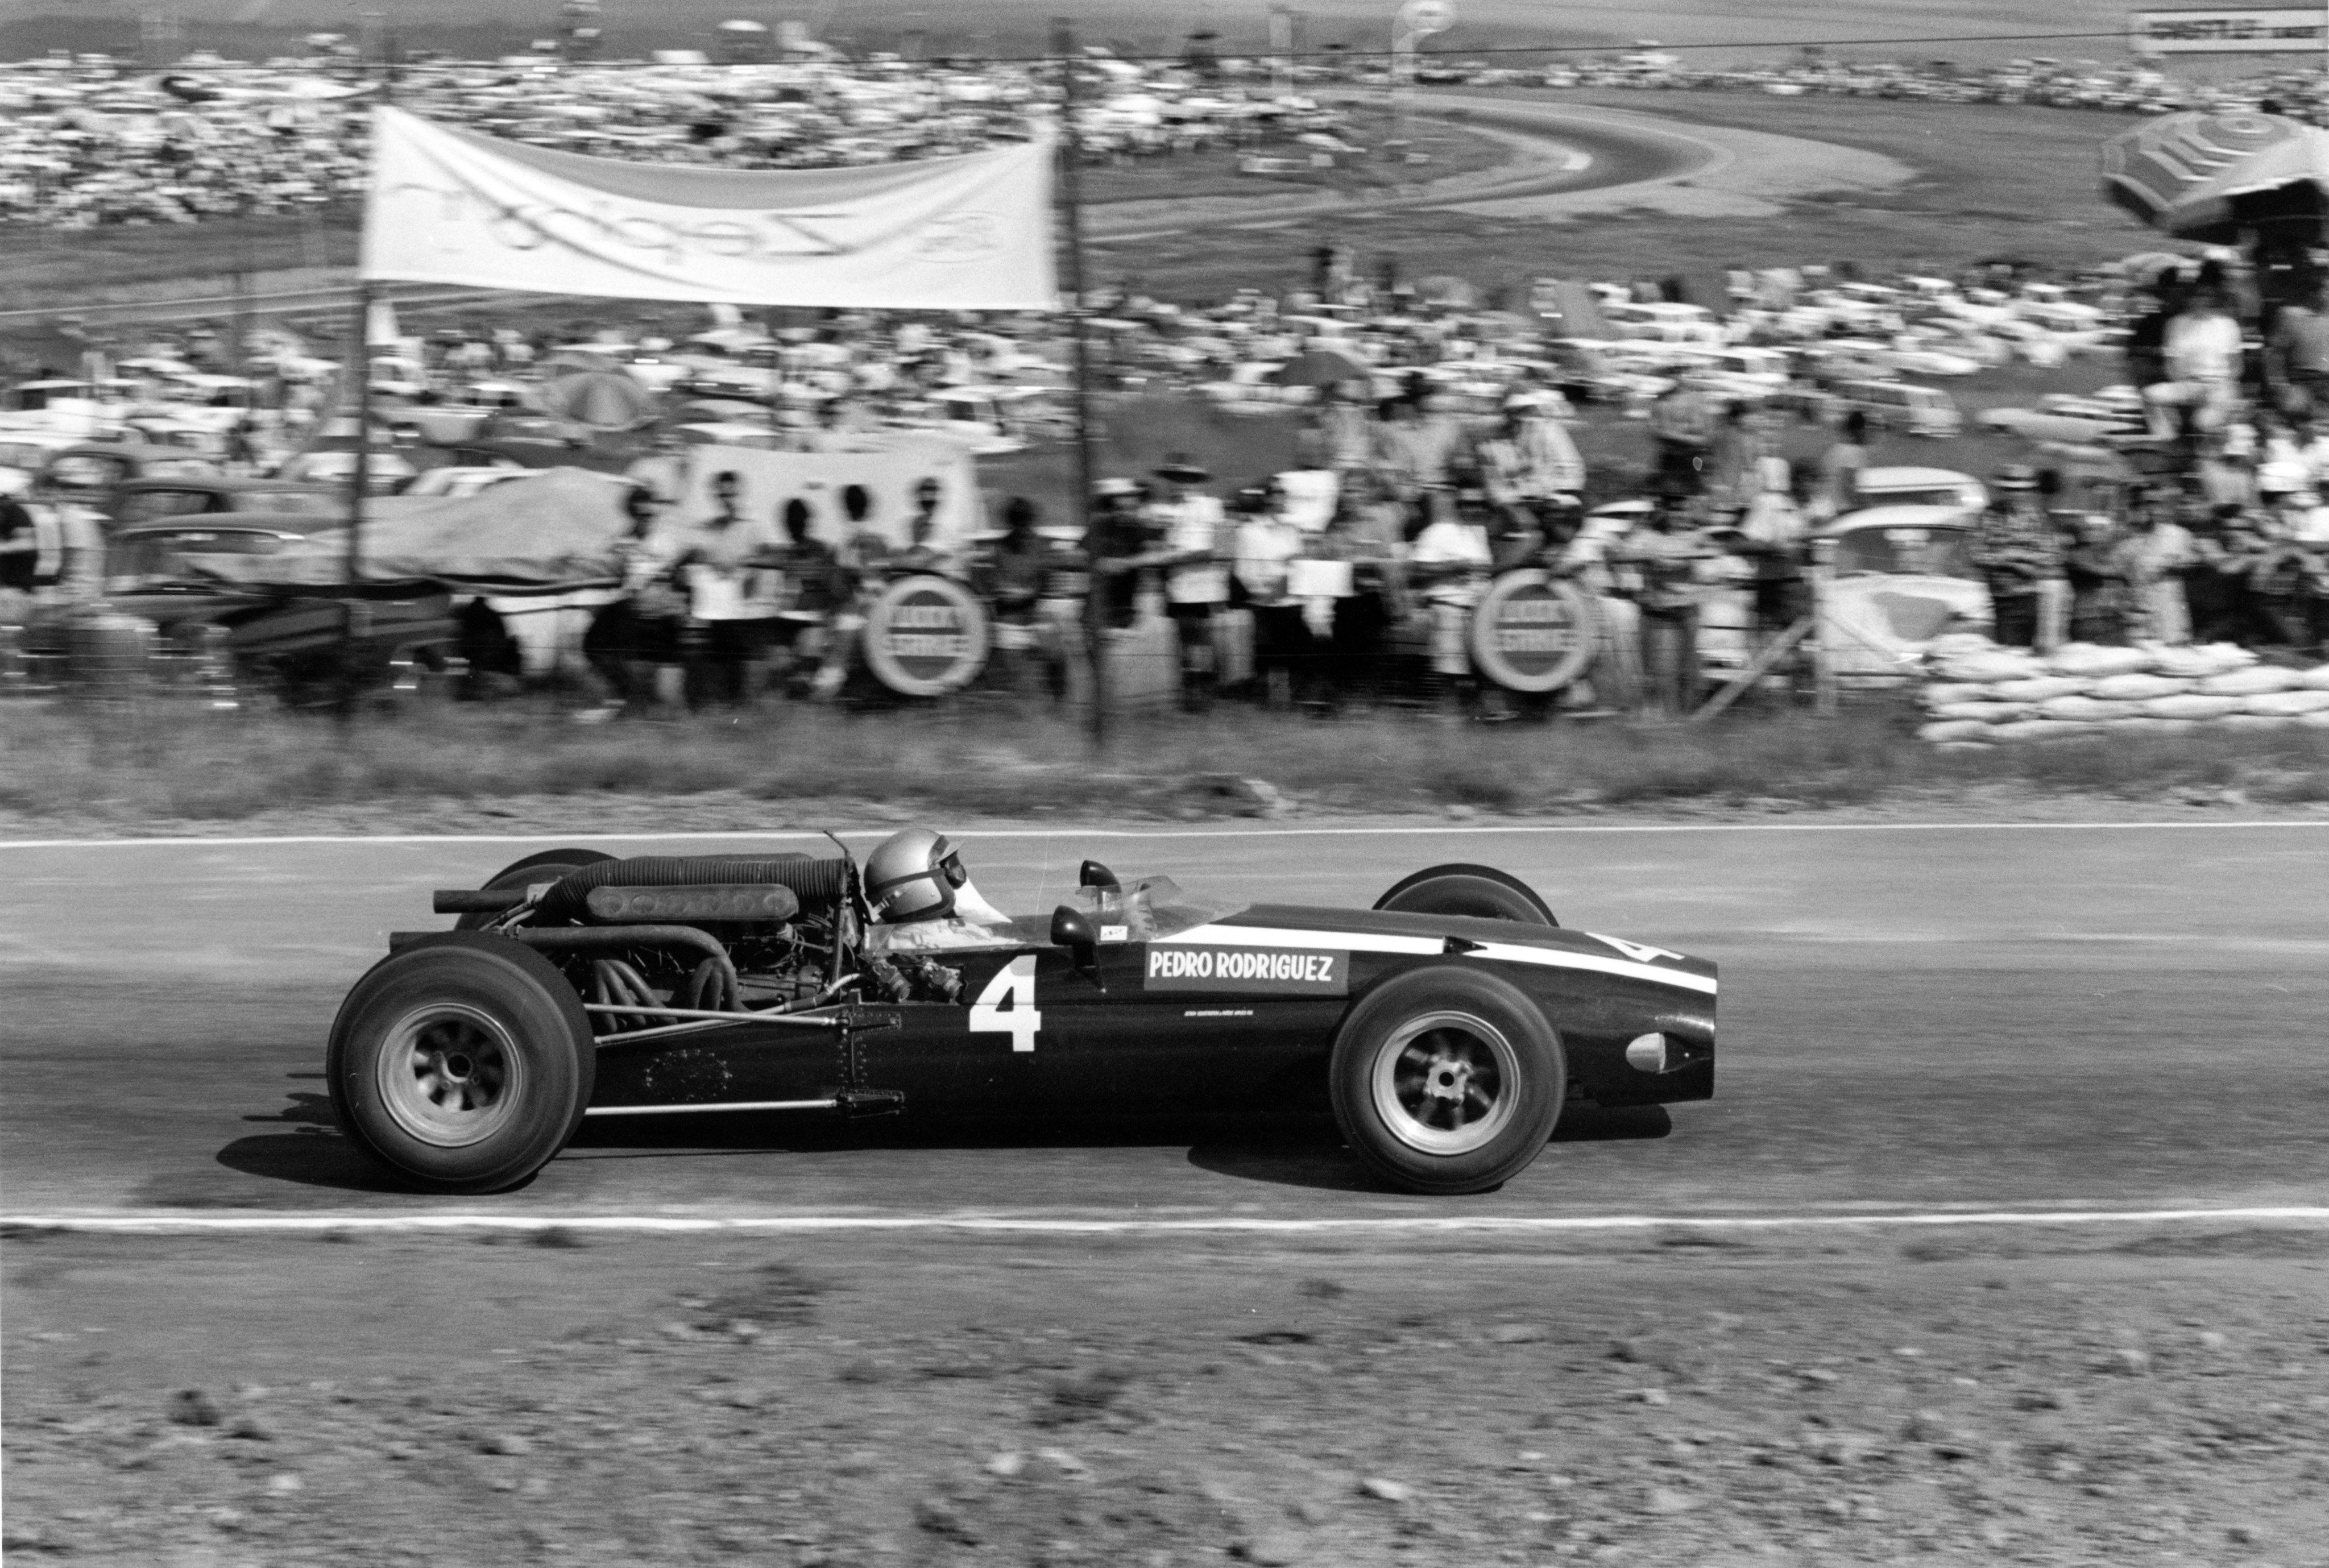 January 02, 1967, South Africa, 1st F1 win for Pedro Rodriguez.